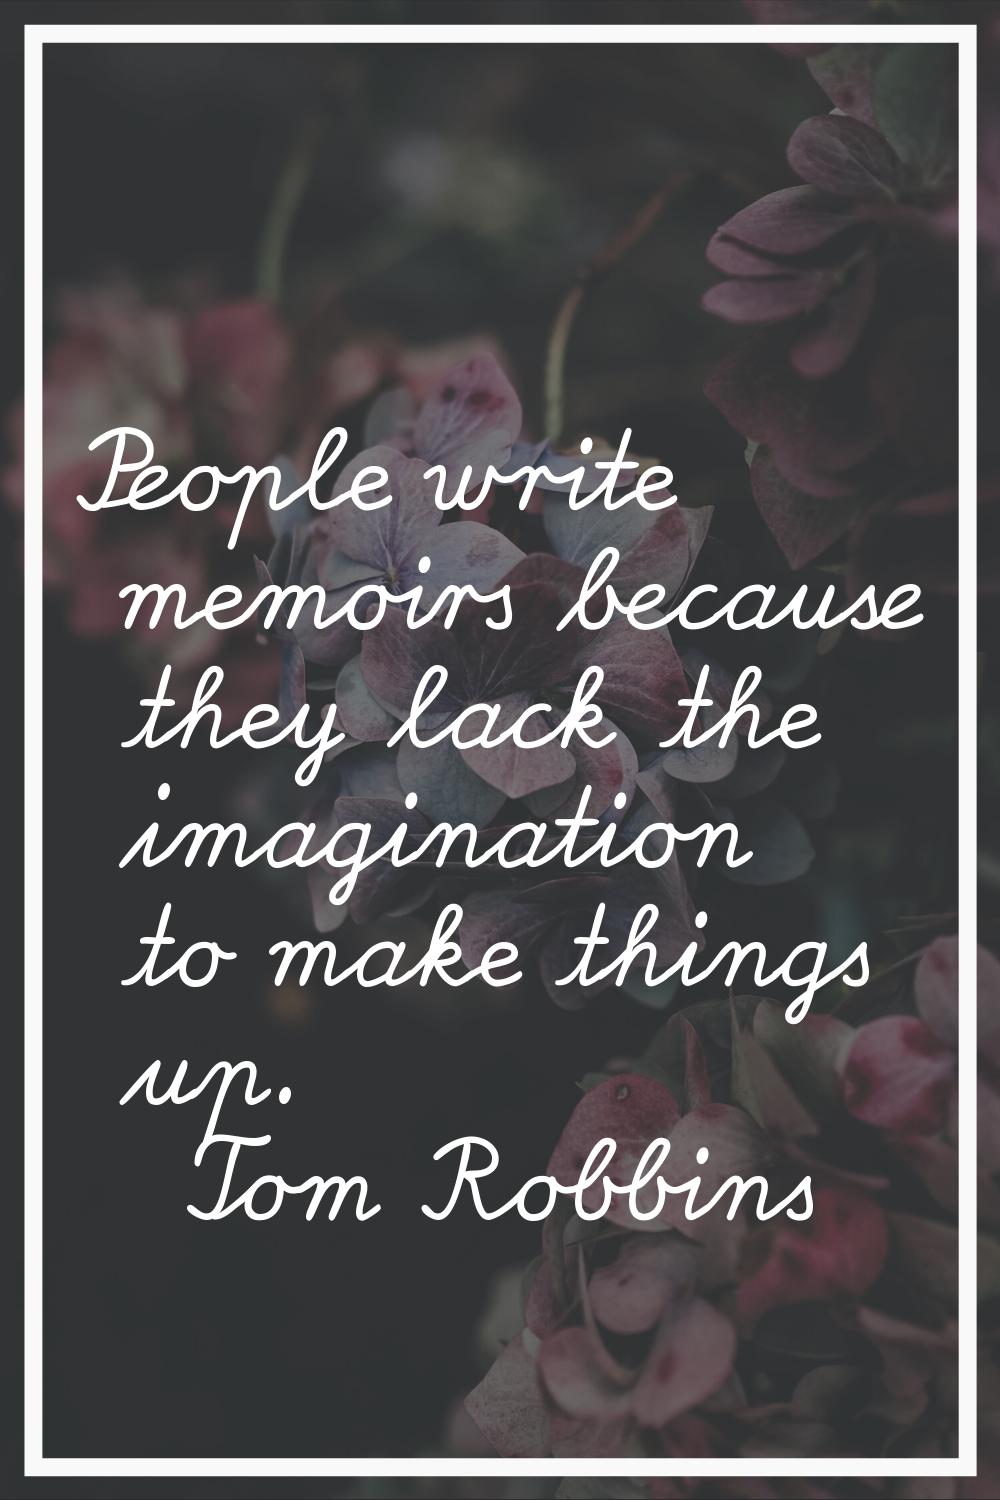 People write memoirs because they lack the imagination to make things up.